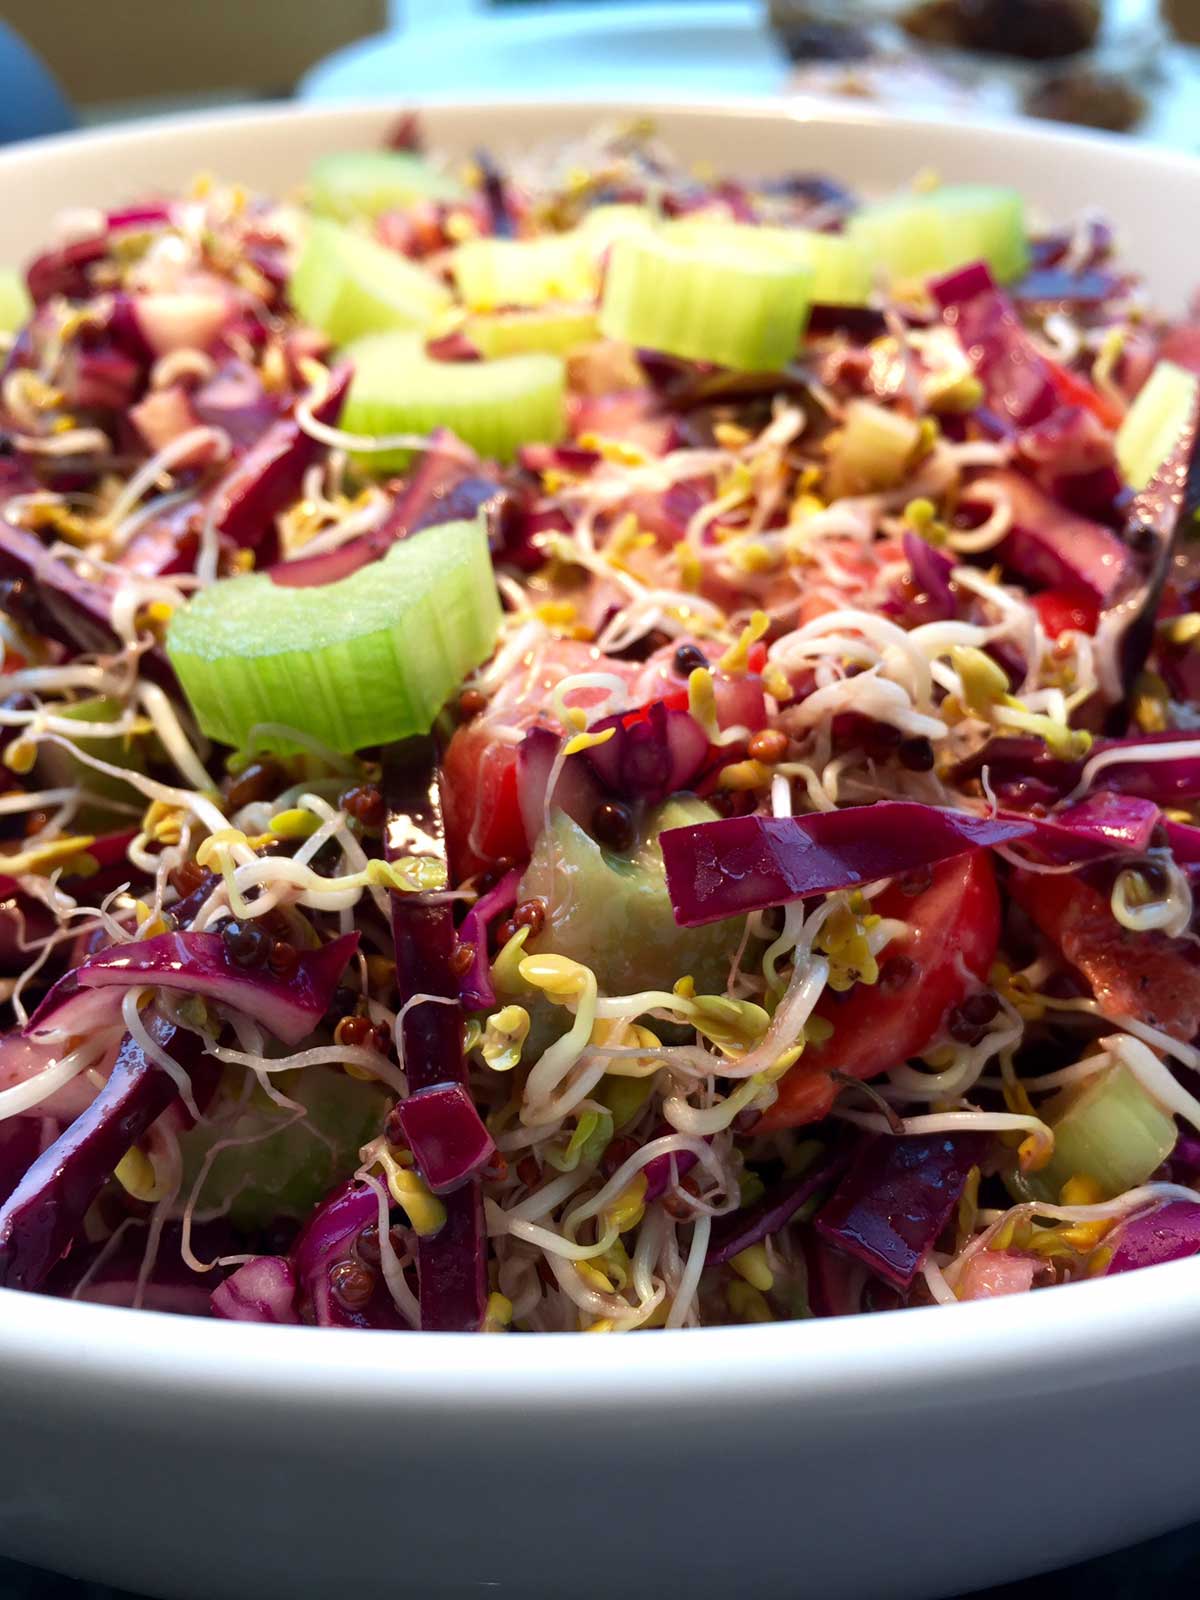 Broccoli Sprouts And Red Cabbage Salad